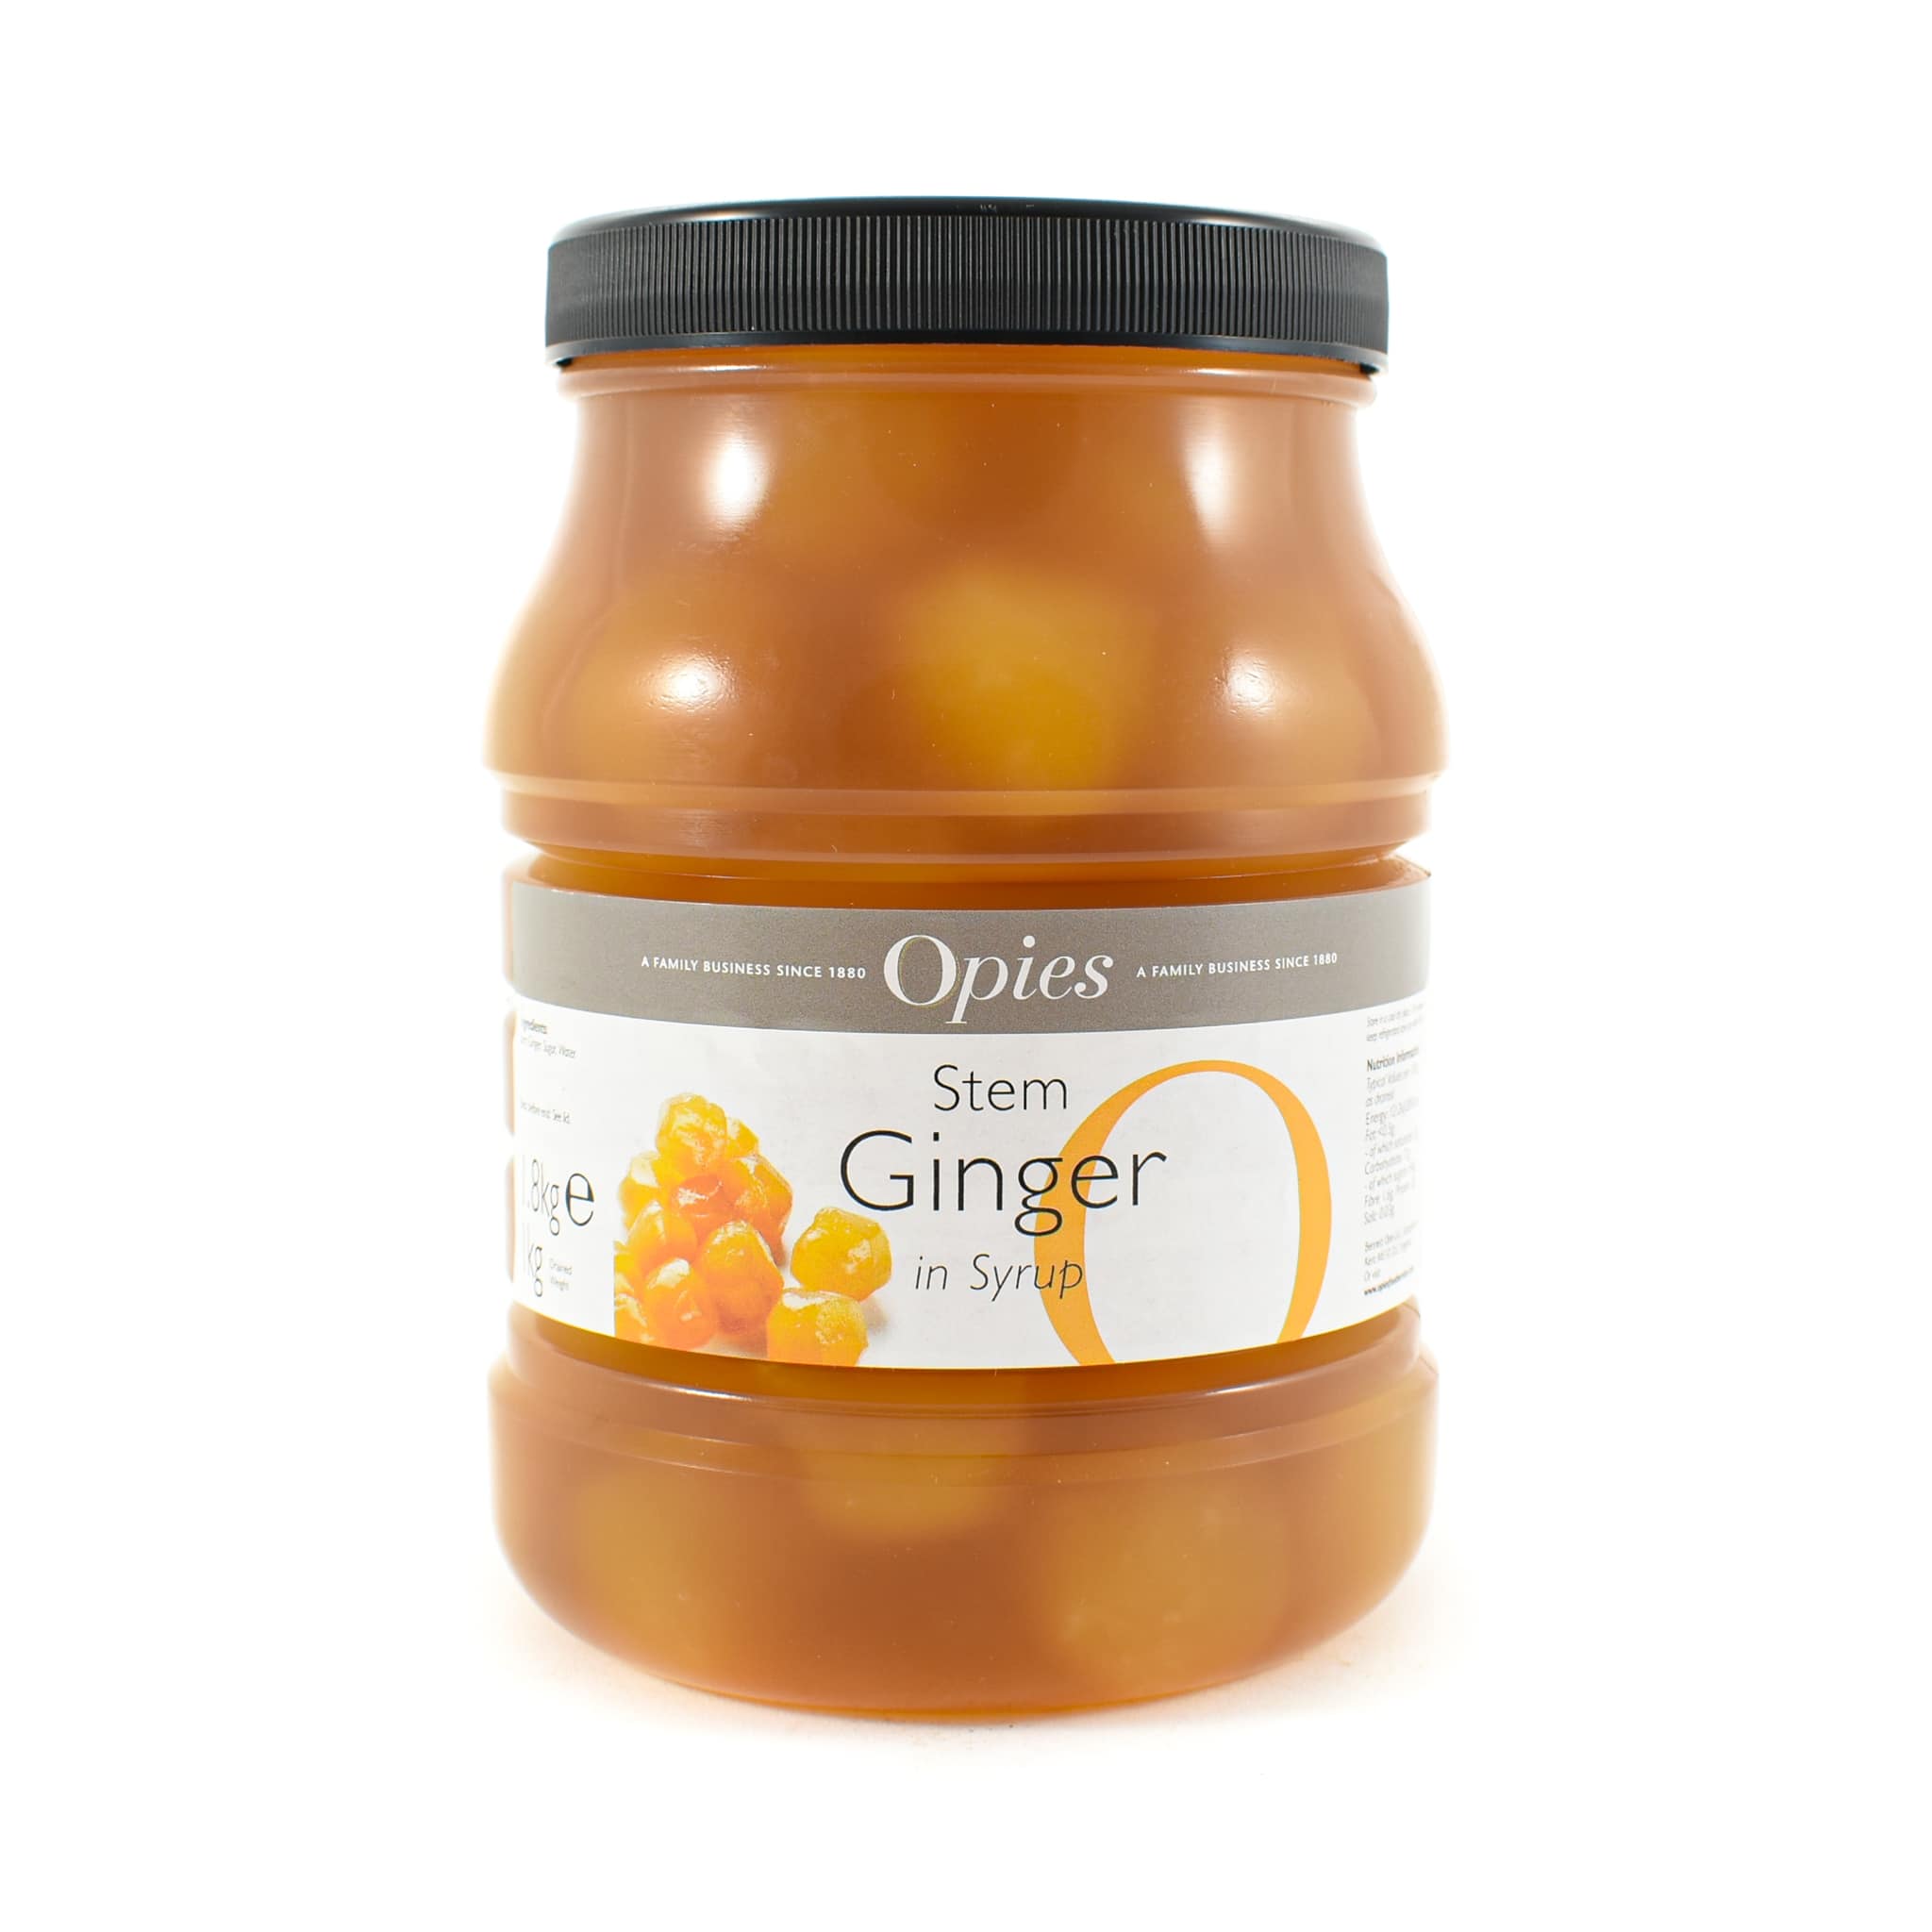 Opies Stem Ginger in Syrup 1.8kg